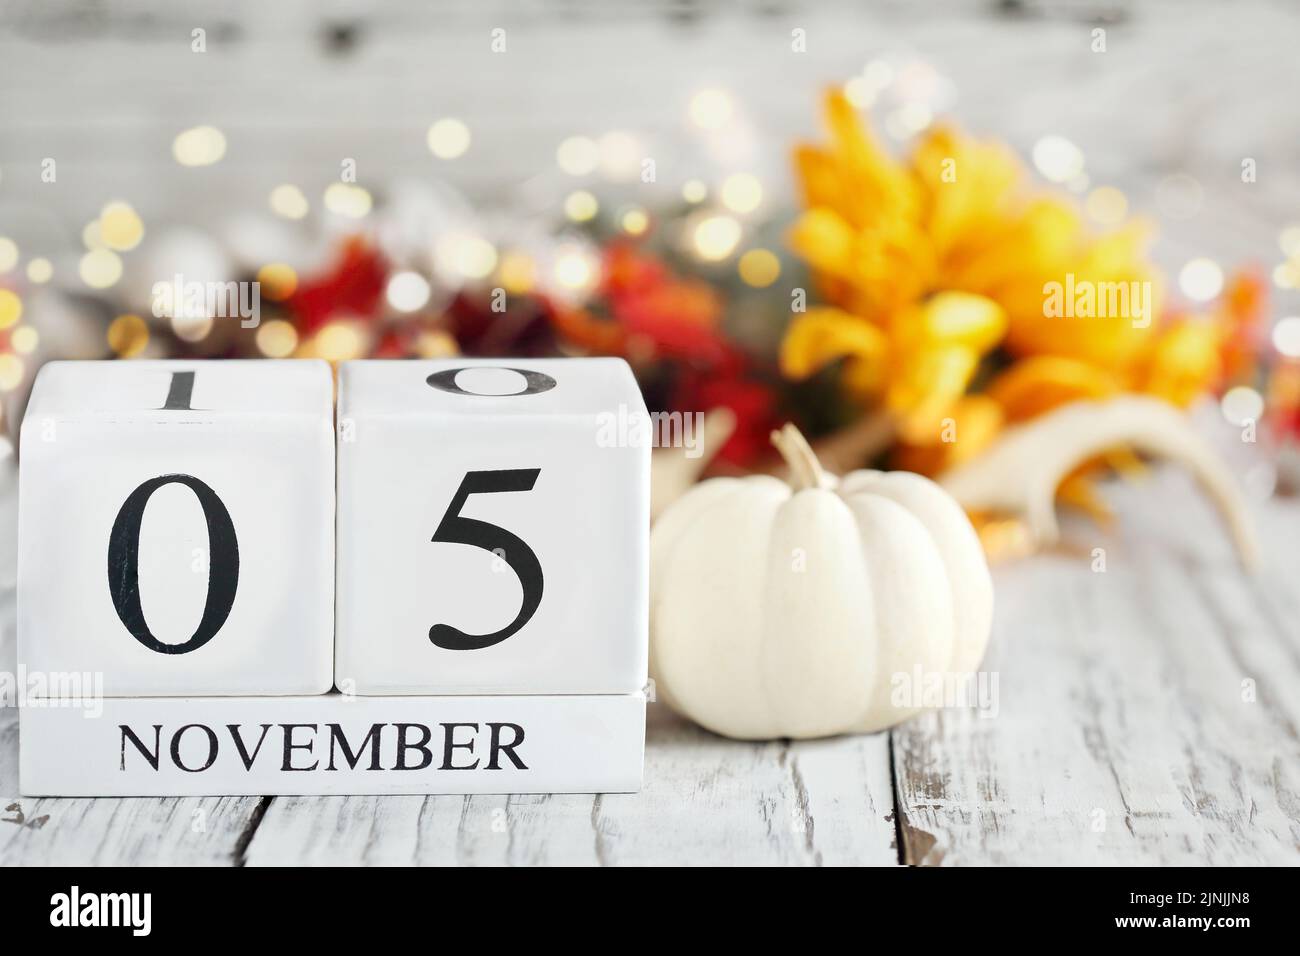 White wood calendar blocks with the date November 5th and autumn decorations over a wooden table. Selective focus with blurred background. Stock Photo